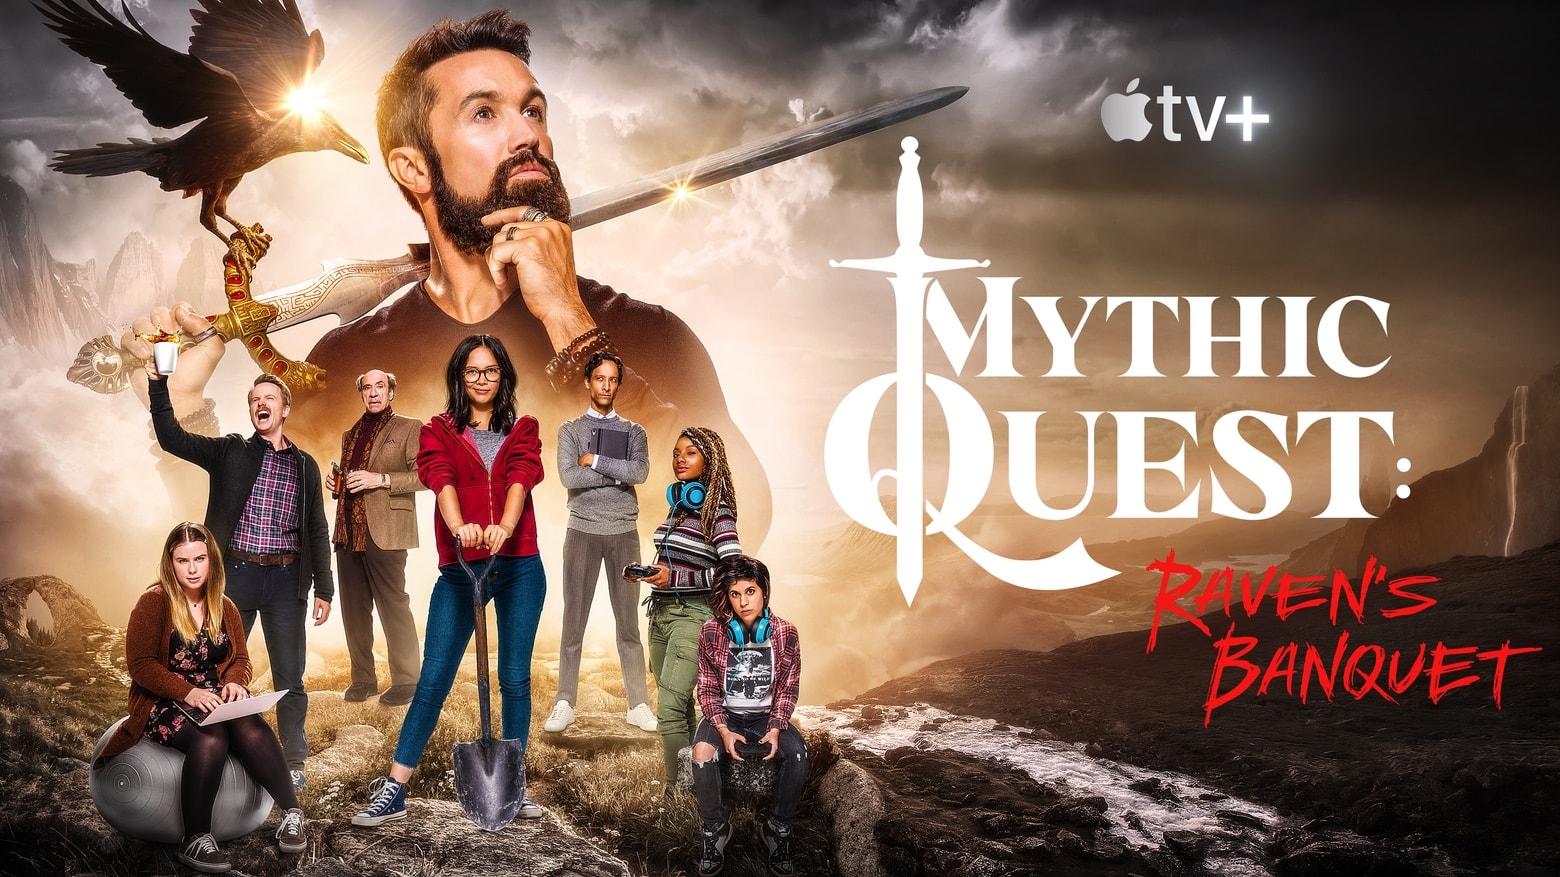 All 9 episodes of Mythic Quest: Raven's Banquet are live on Apple TV+